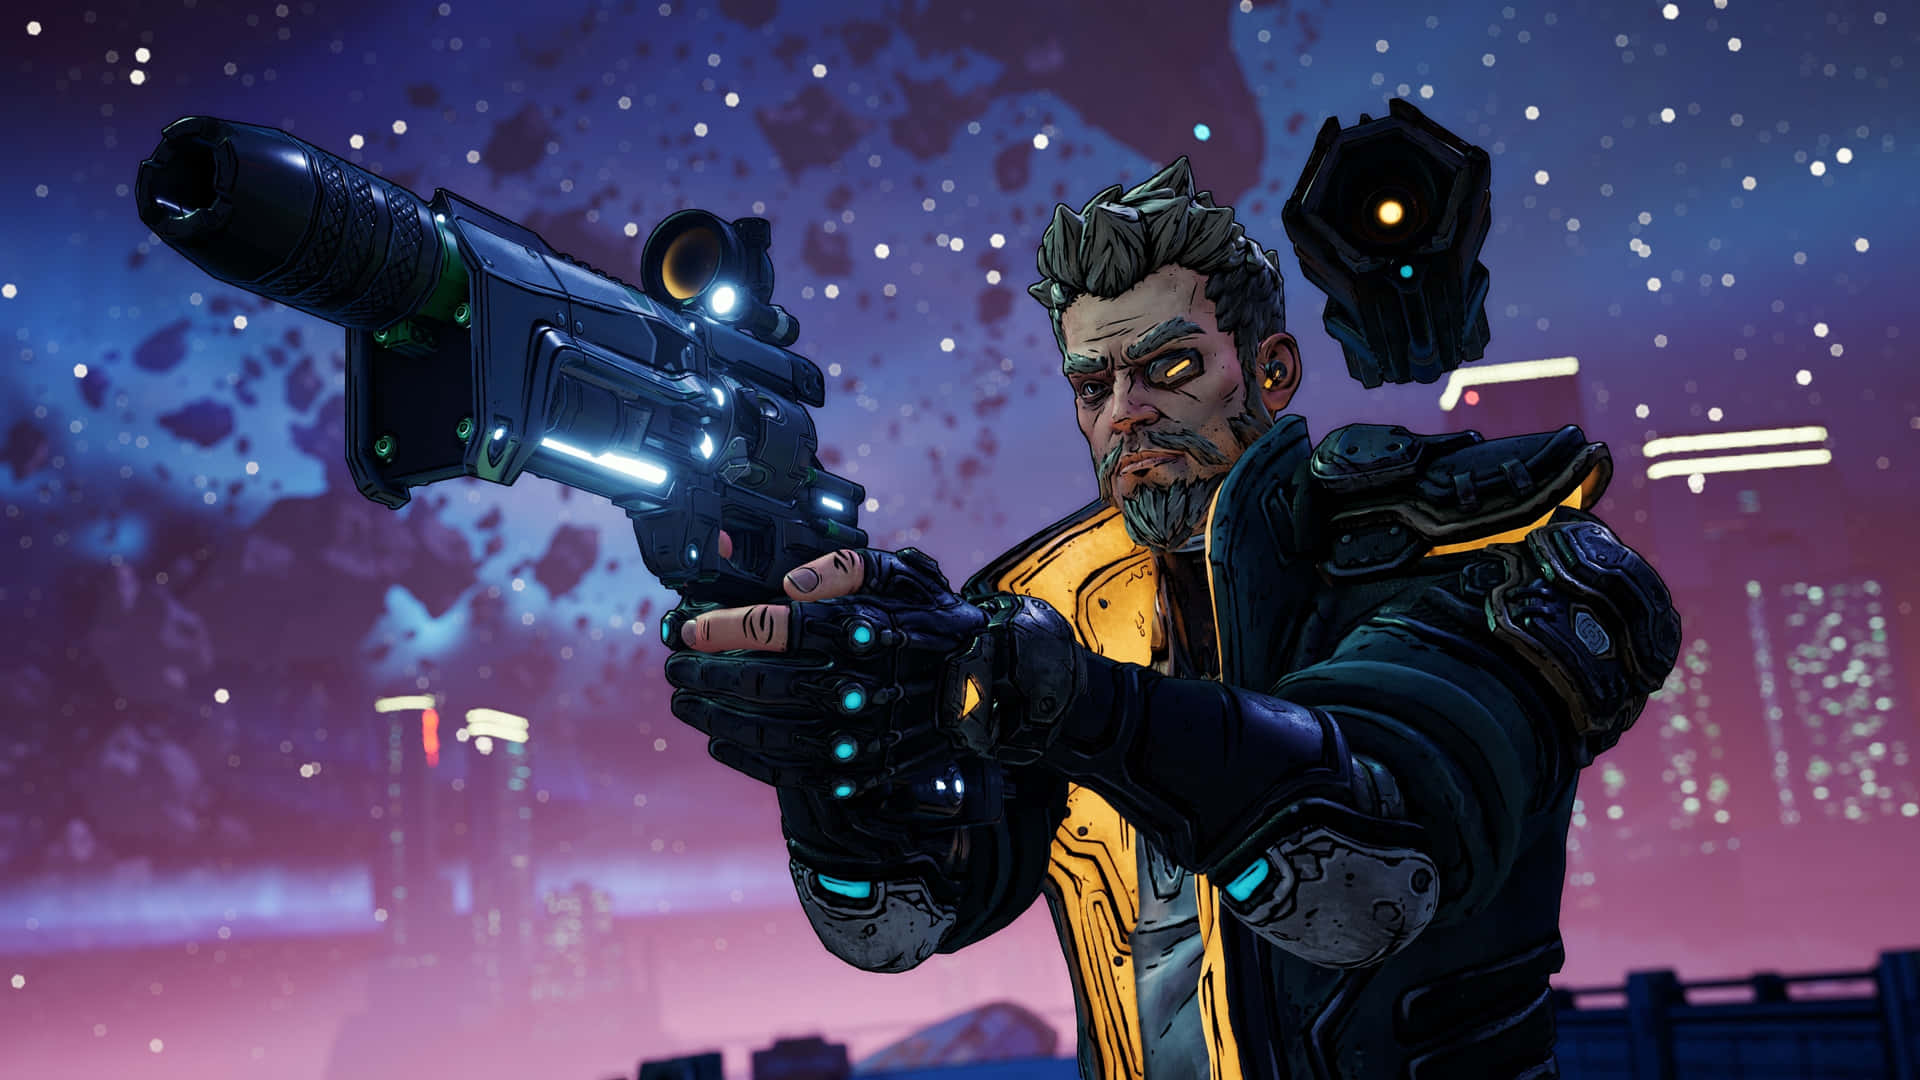 An action-packed adventure through the land of Borderlands 3